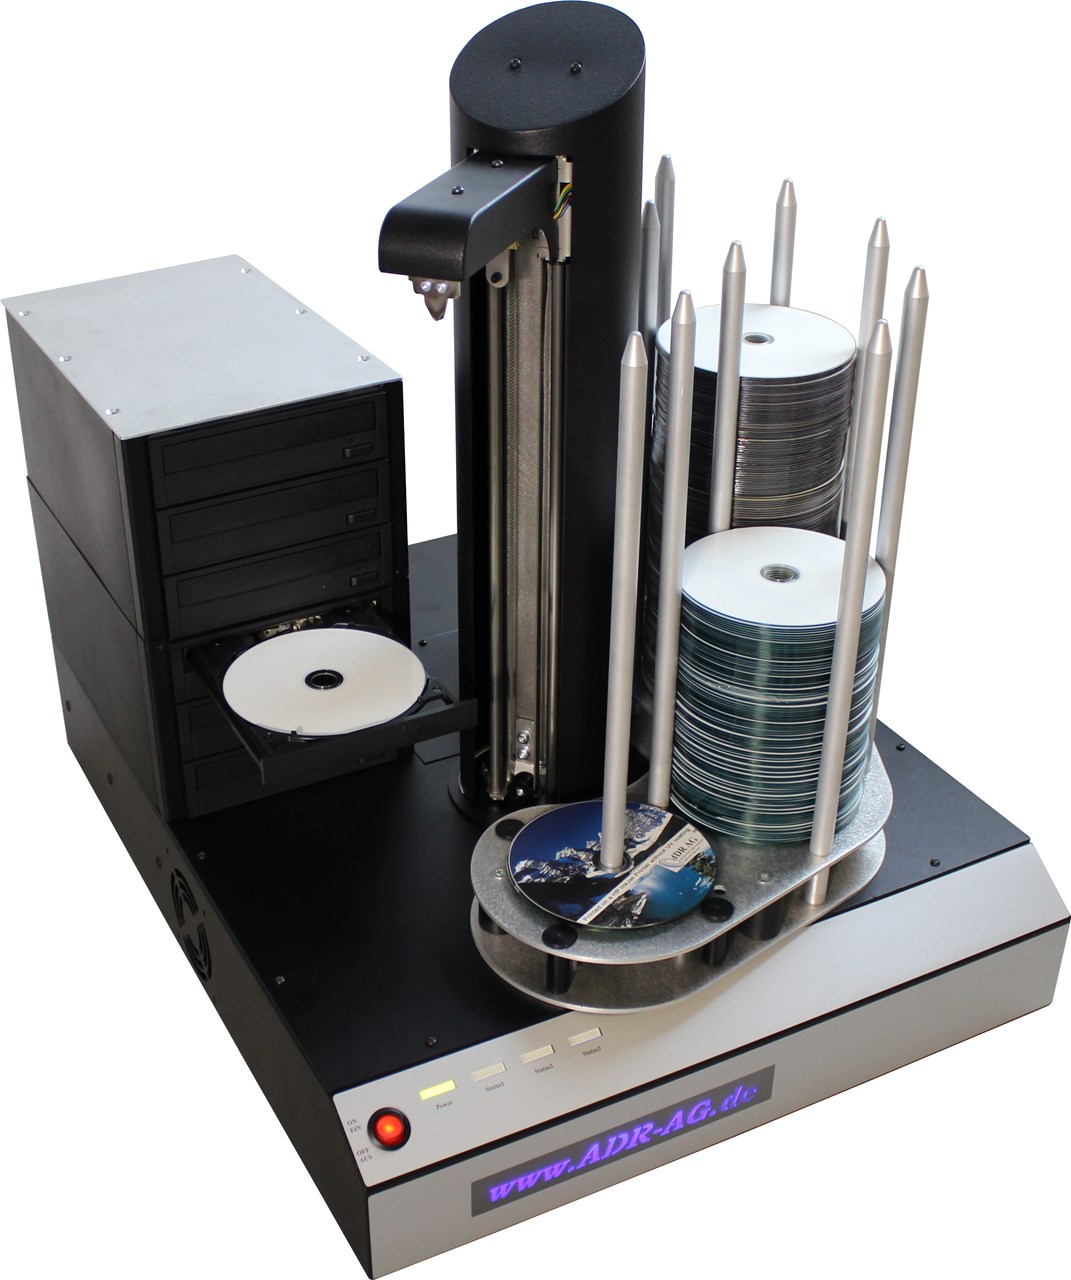 Billede af Cyclone 6 CD / DVD copying robot PC connected